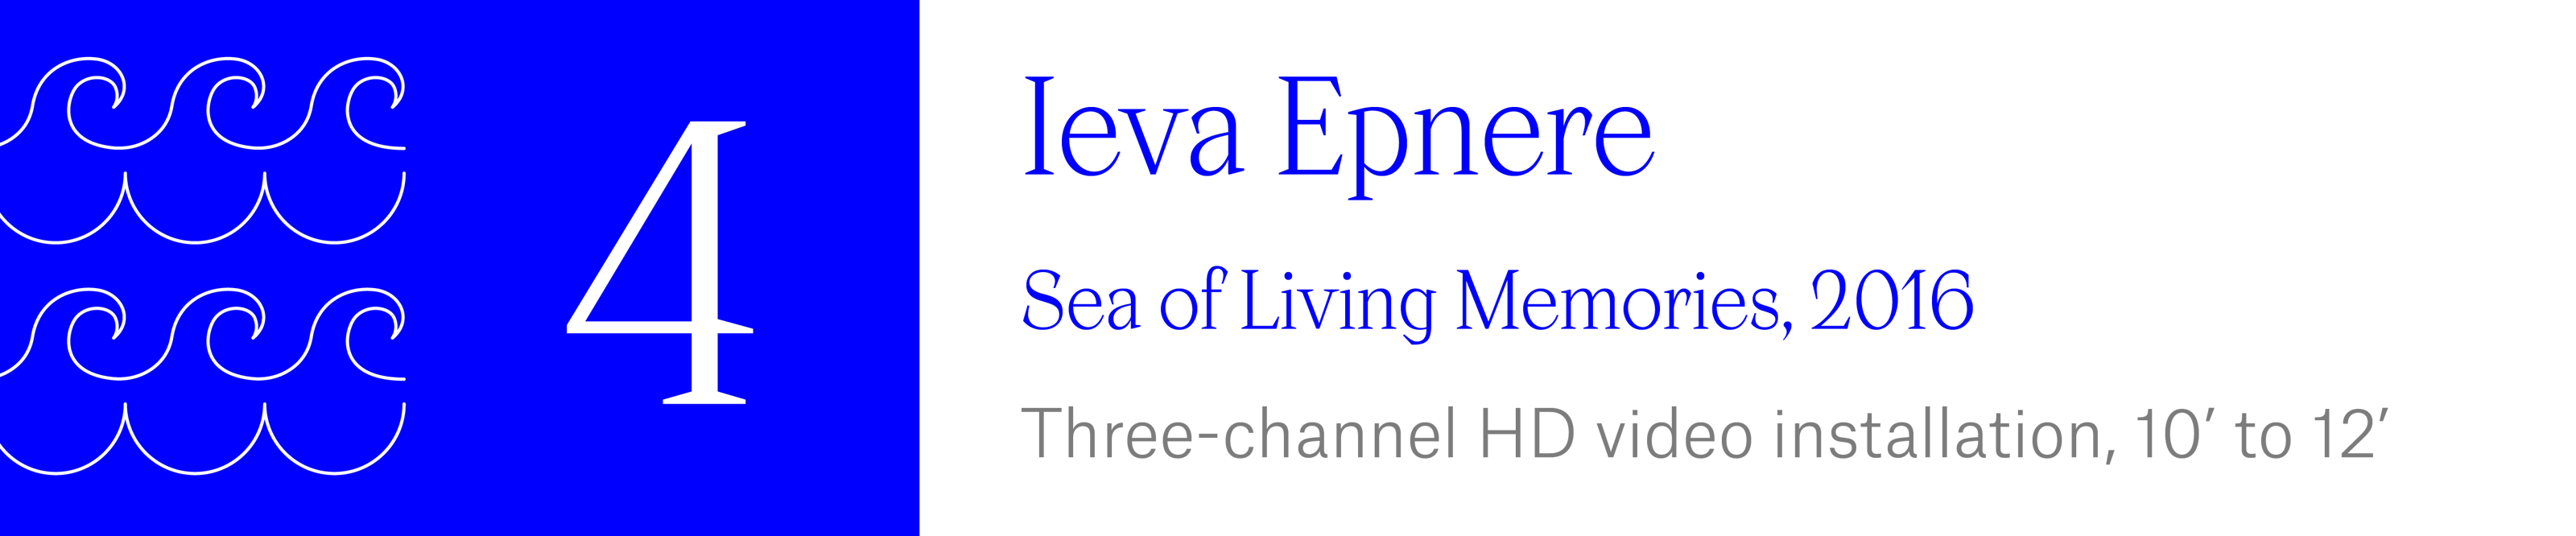 The Wave (4) - Ieva Epnere - Sea of Living Memories, 2016, three-channel HD video installation, 10 minutes to 12 minutes each